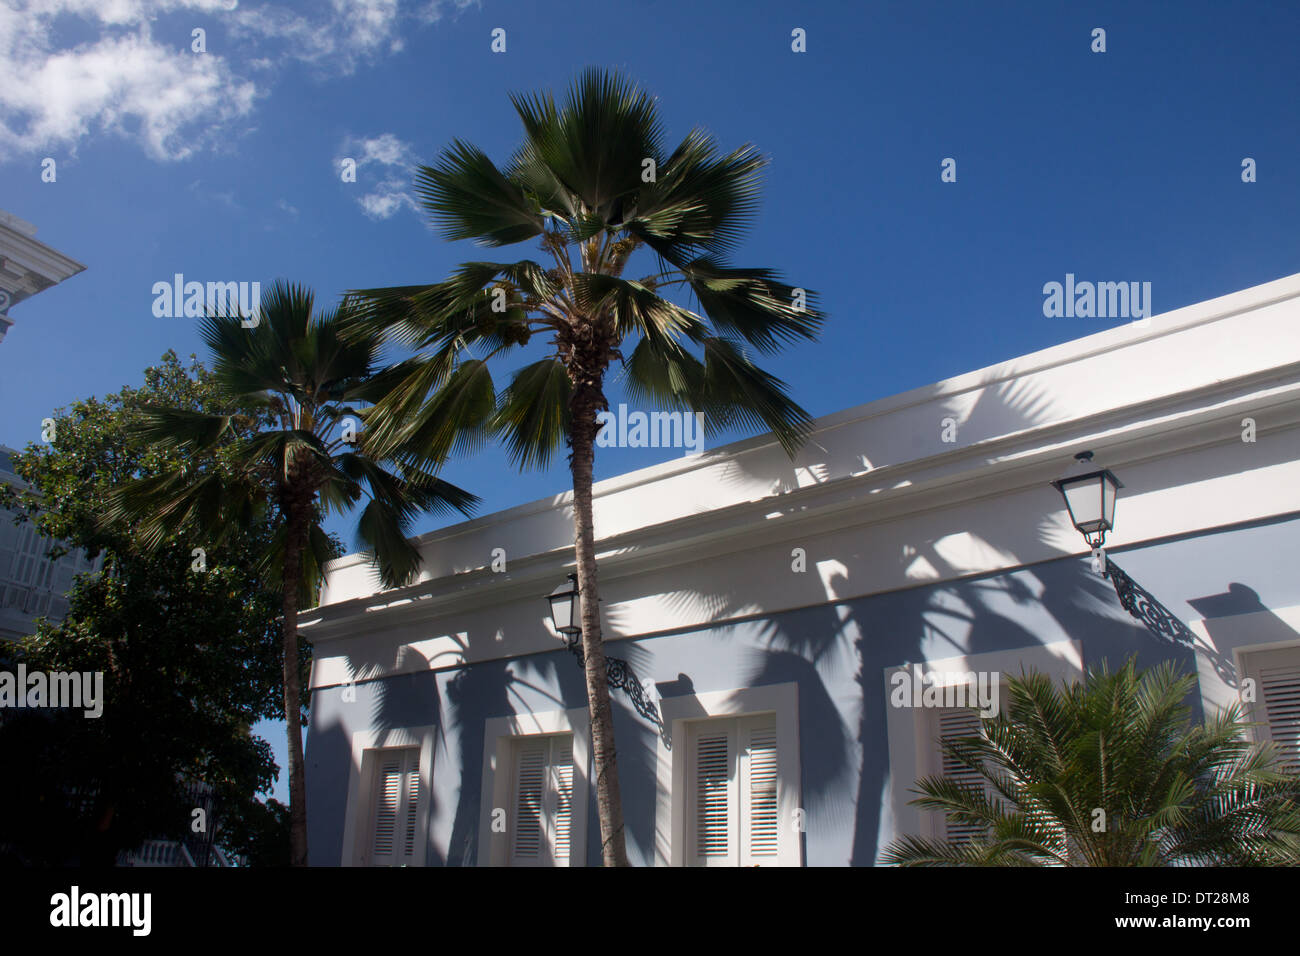 Palms at La Fortaleza, historic fort and governor's mansion in Old San Juan, Puerto Rico Stock Photo